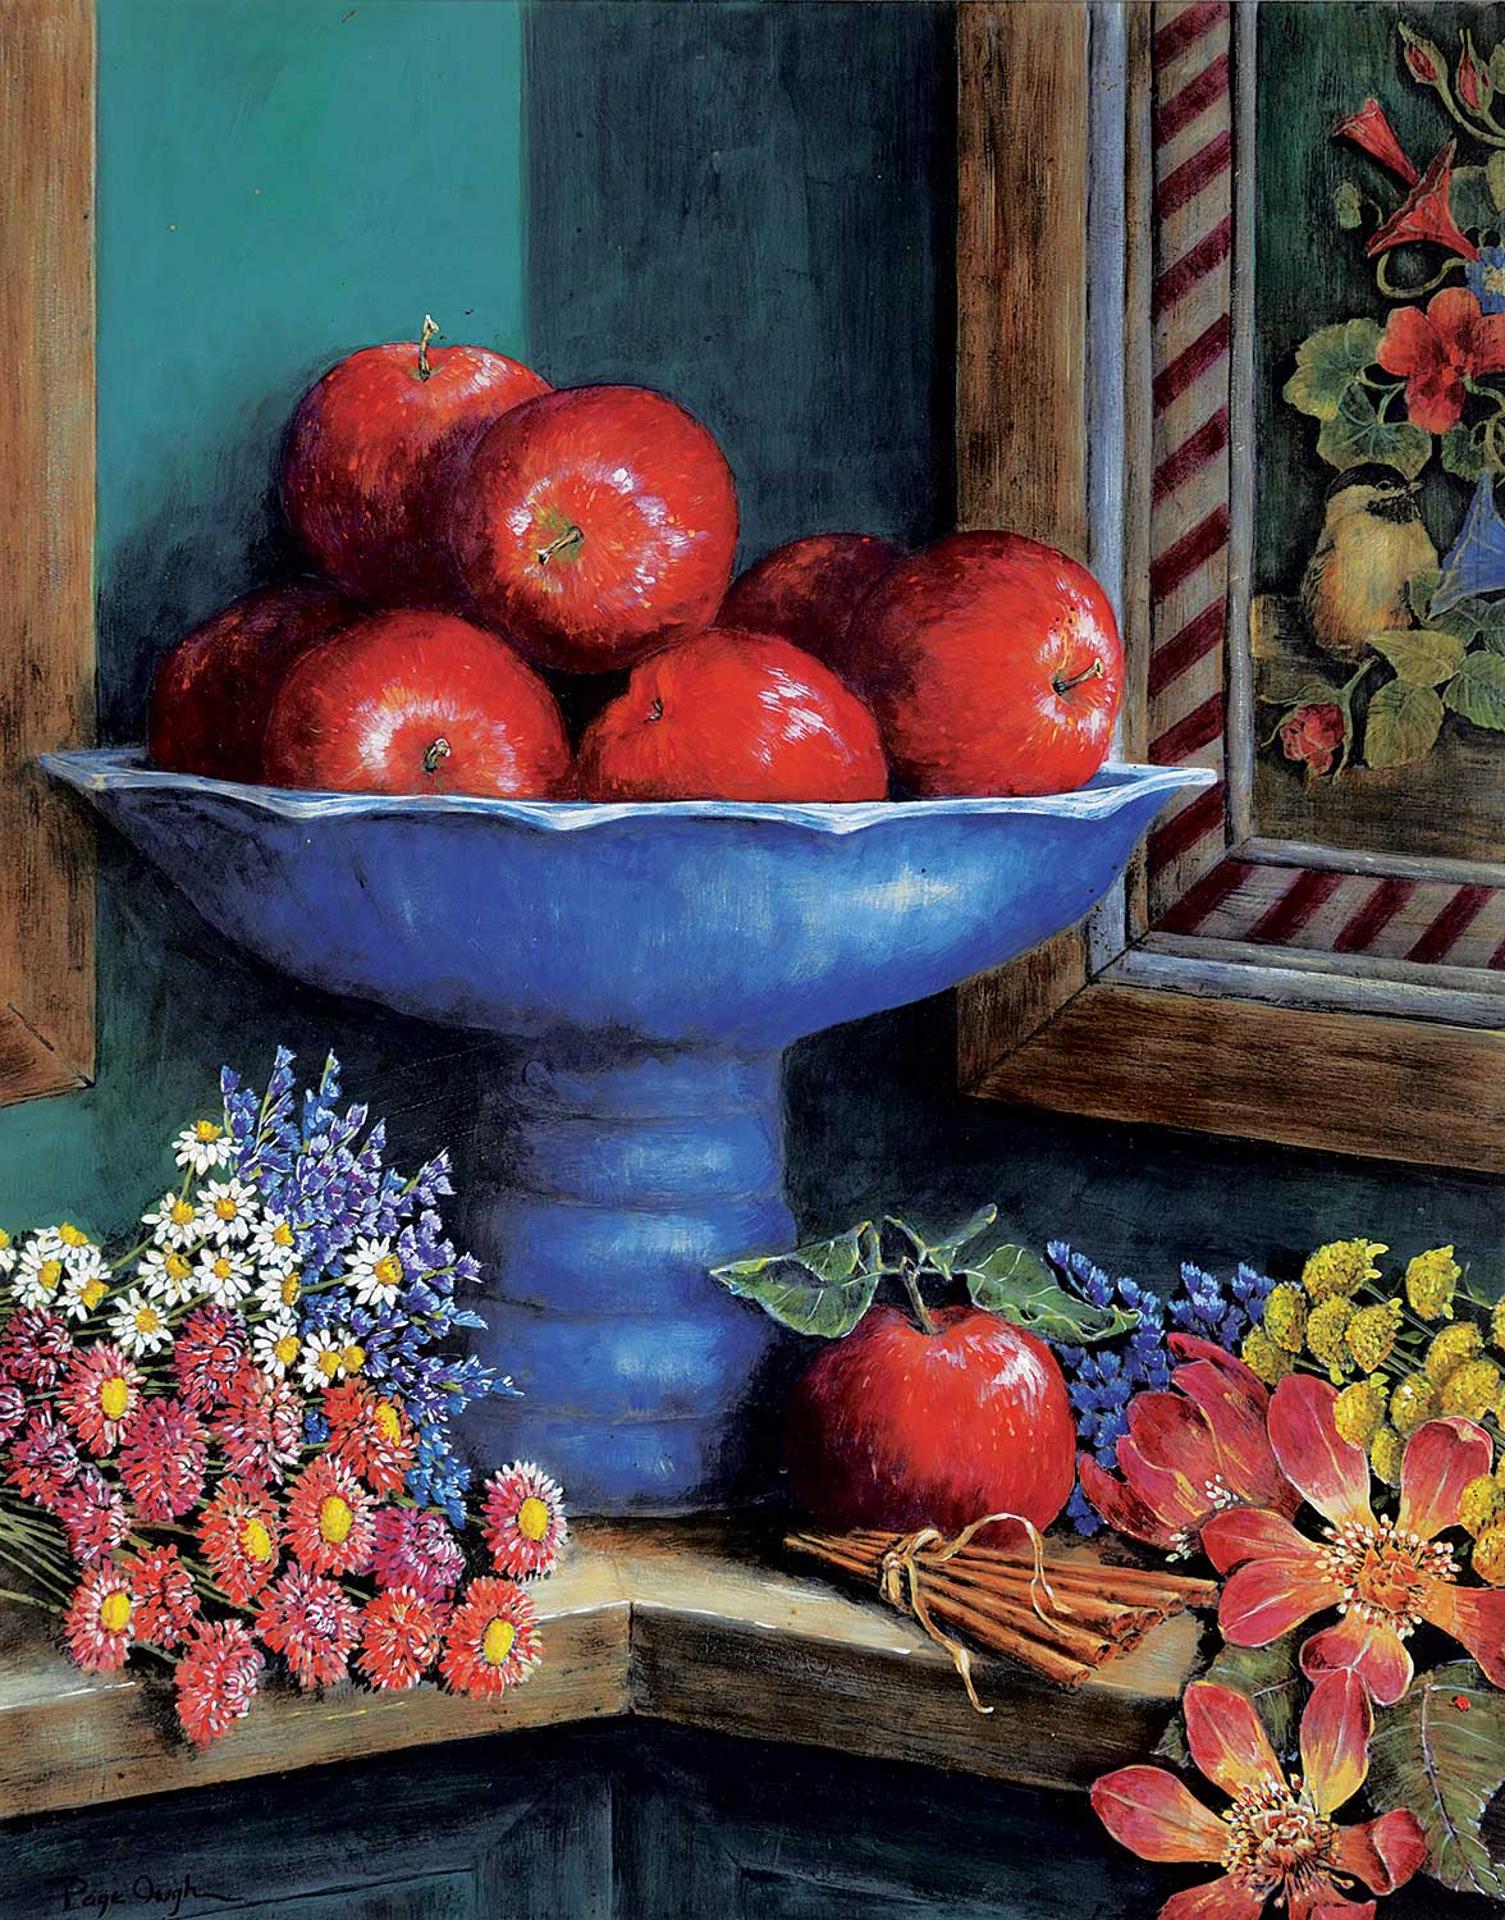 Page Ough (1946) - Untitled - Apples in a Bowl